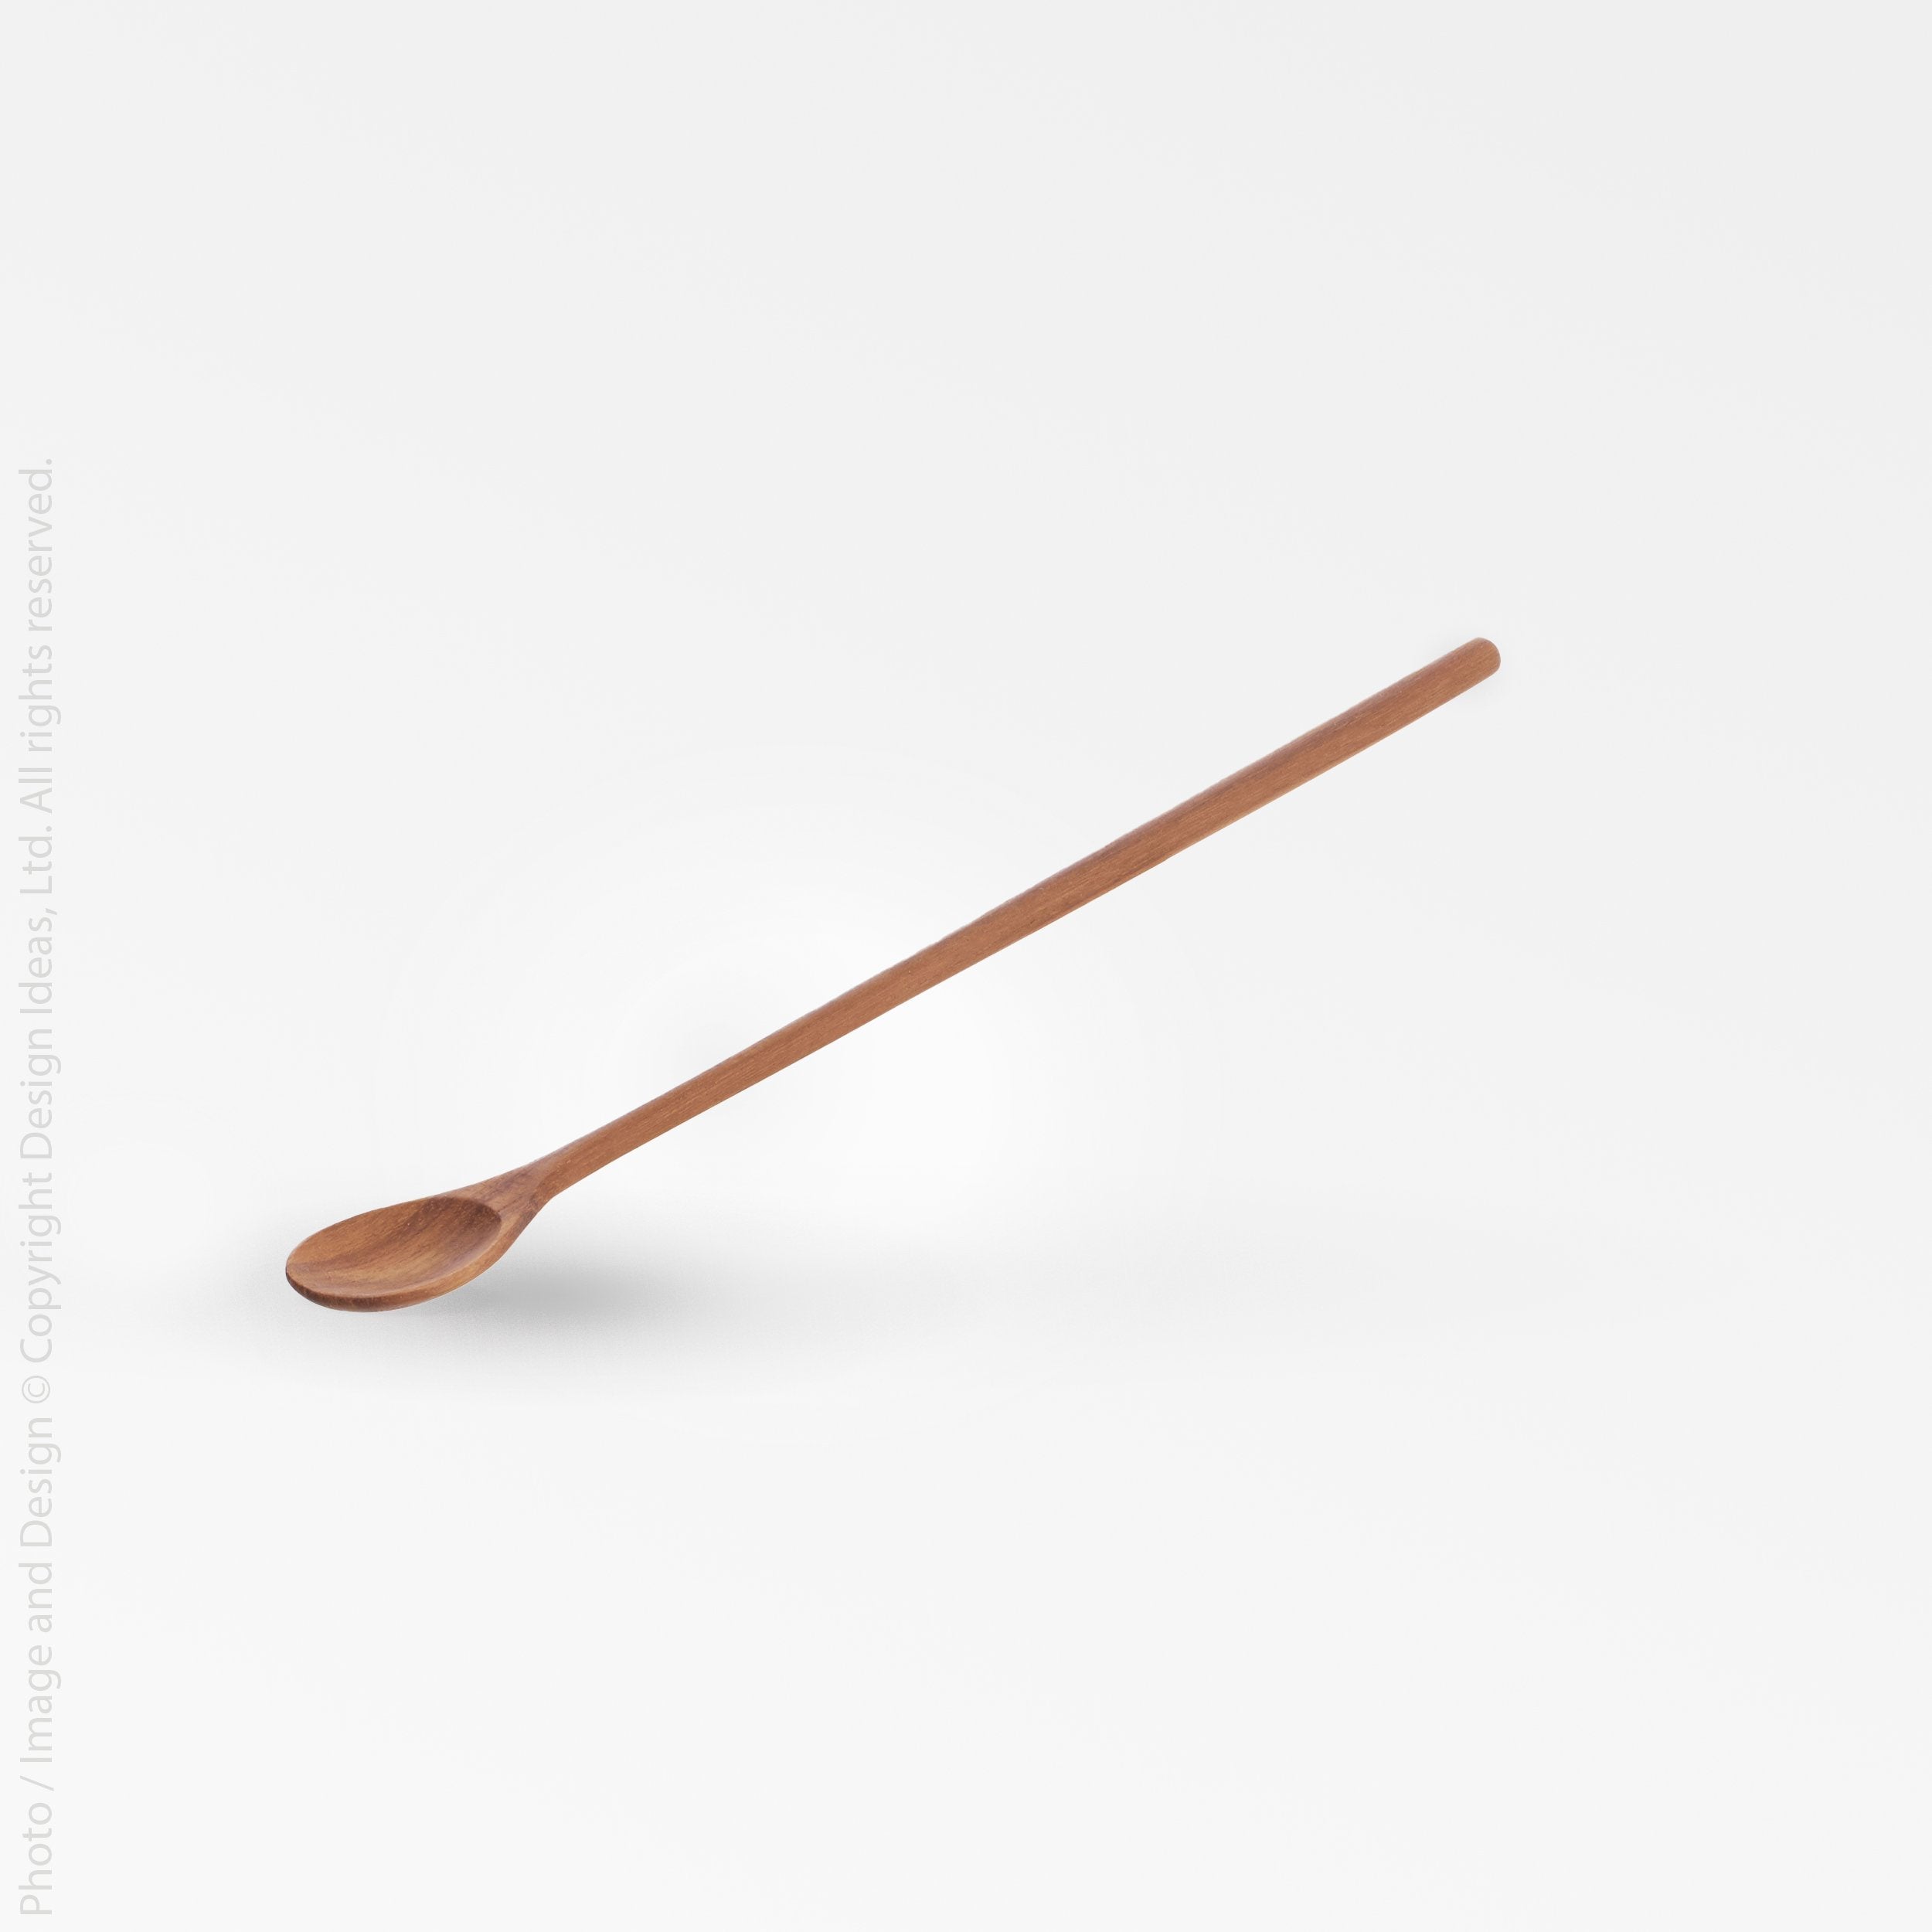 Chiku Teak Spoon - Black Color | Image 1 | From the Chiku Collection | Expertly handmade with natural teak for long lasting use | These utensils are sustainably sourced | Available in natural color | texxture home